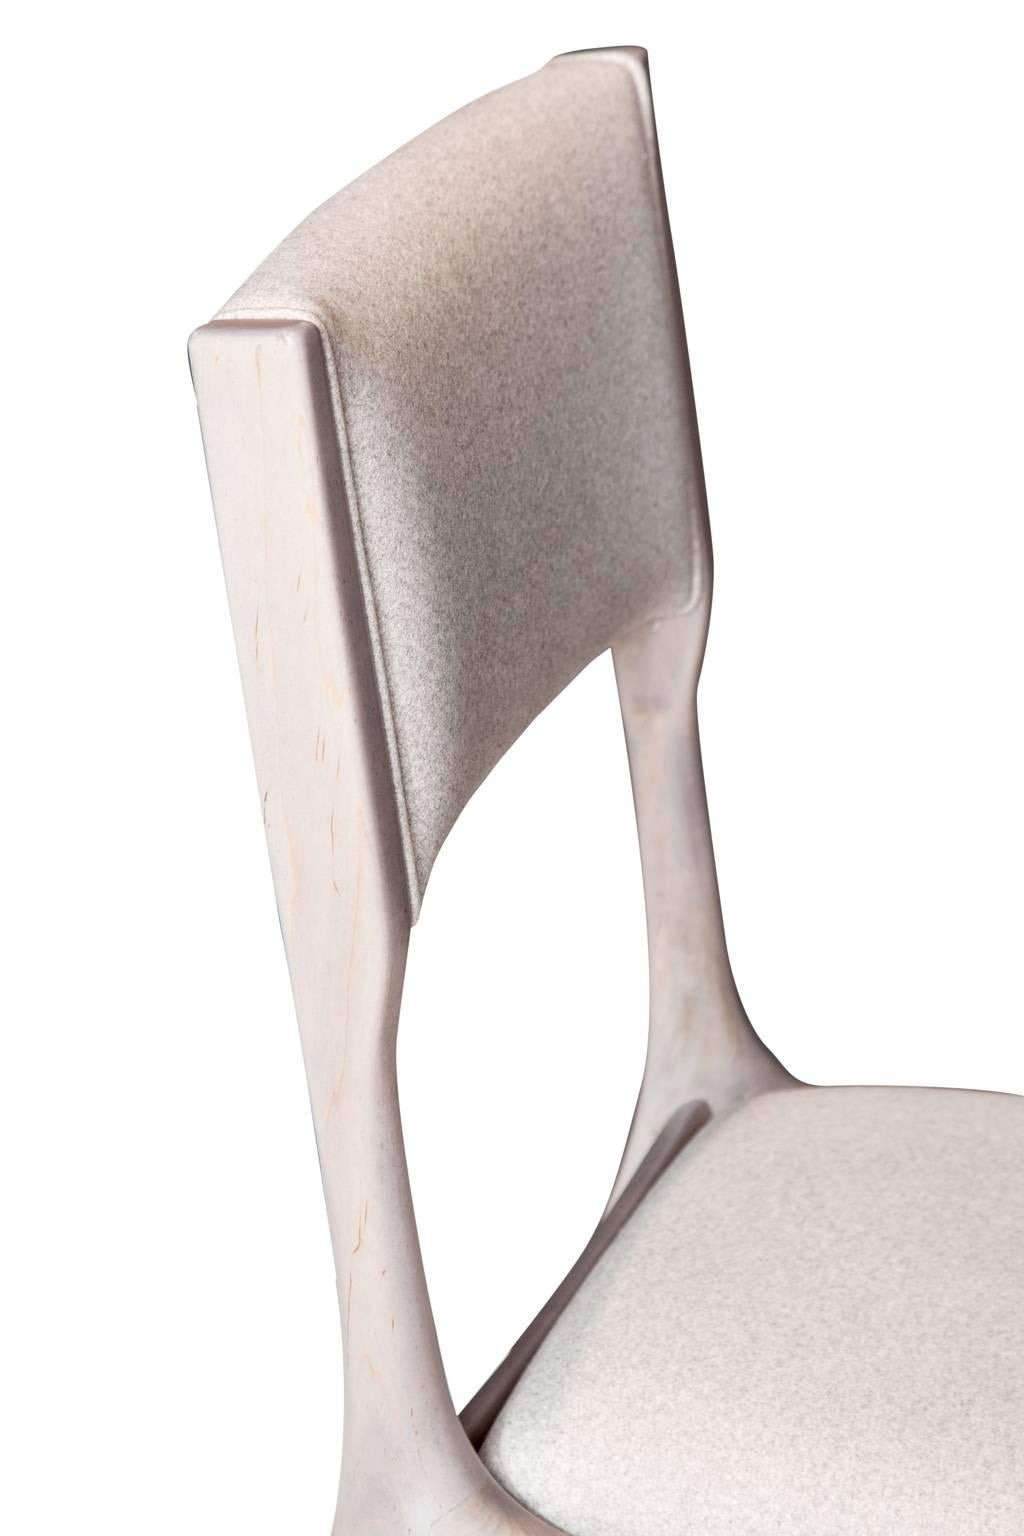 Contemporary Boone Dining Chairs For Sale